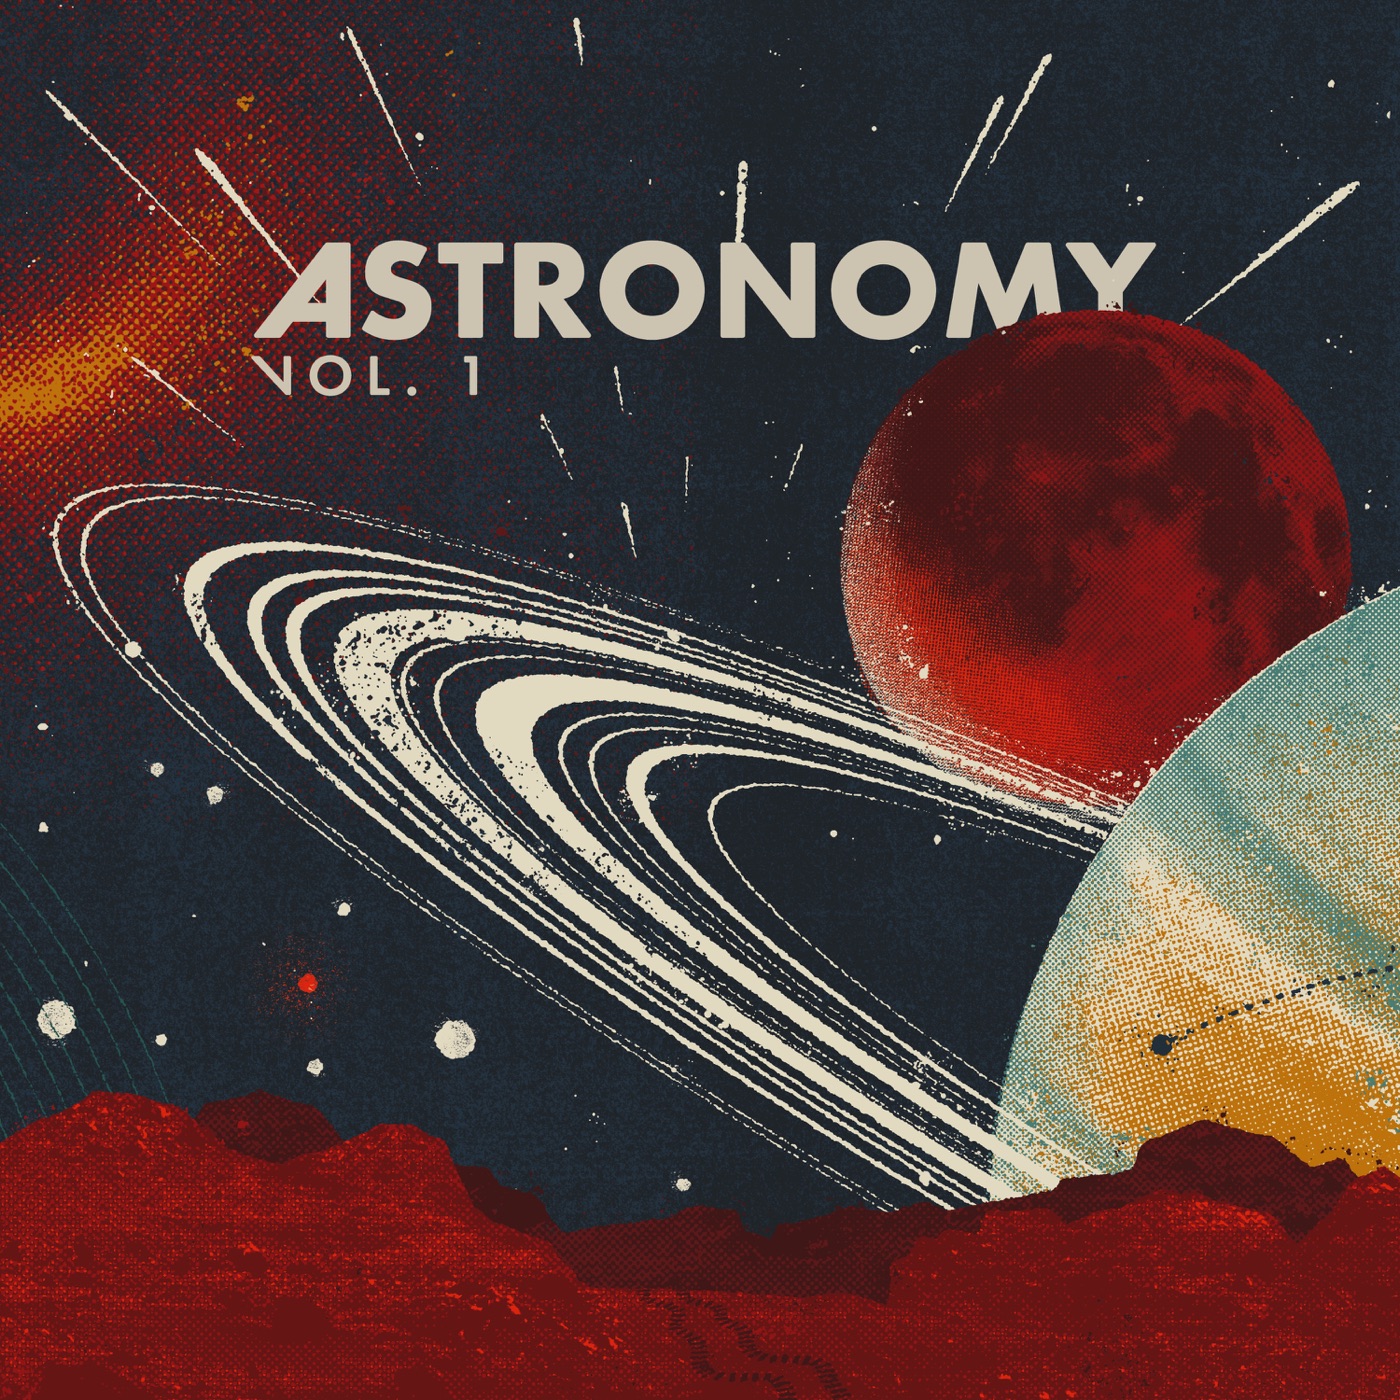 Astronomy, Vol. 1 by Sleeping At Last, Astronomy, Vol. 1